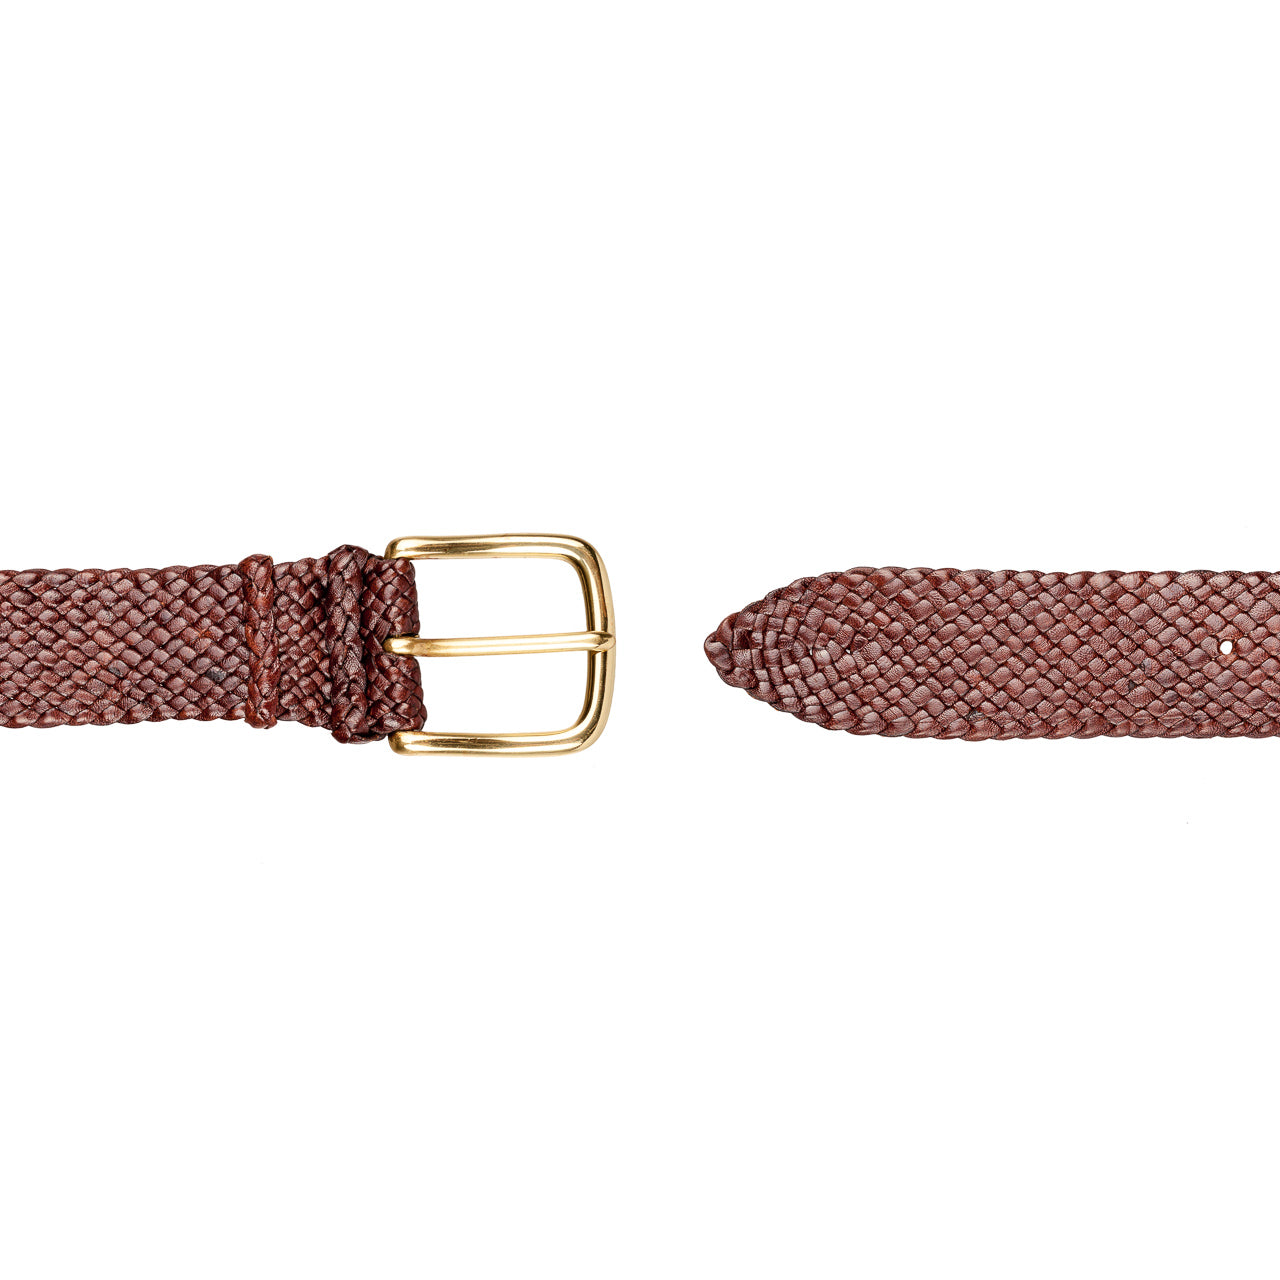 Tan Mens Eureka Belt: Goldmine of style and durability. Classic, 16 strands of Kangaroo, plaited in Brisbane. Refined outback feel. Available in Black or Tan.